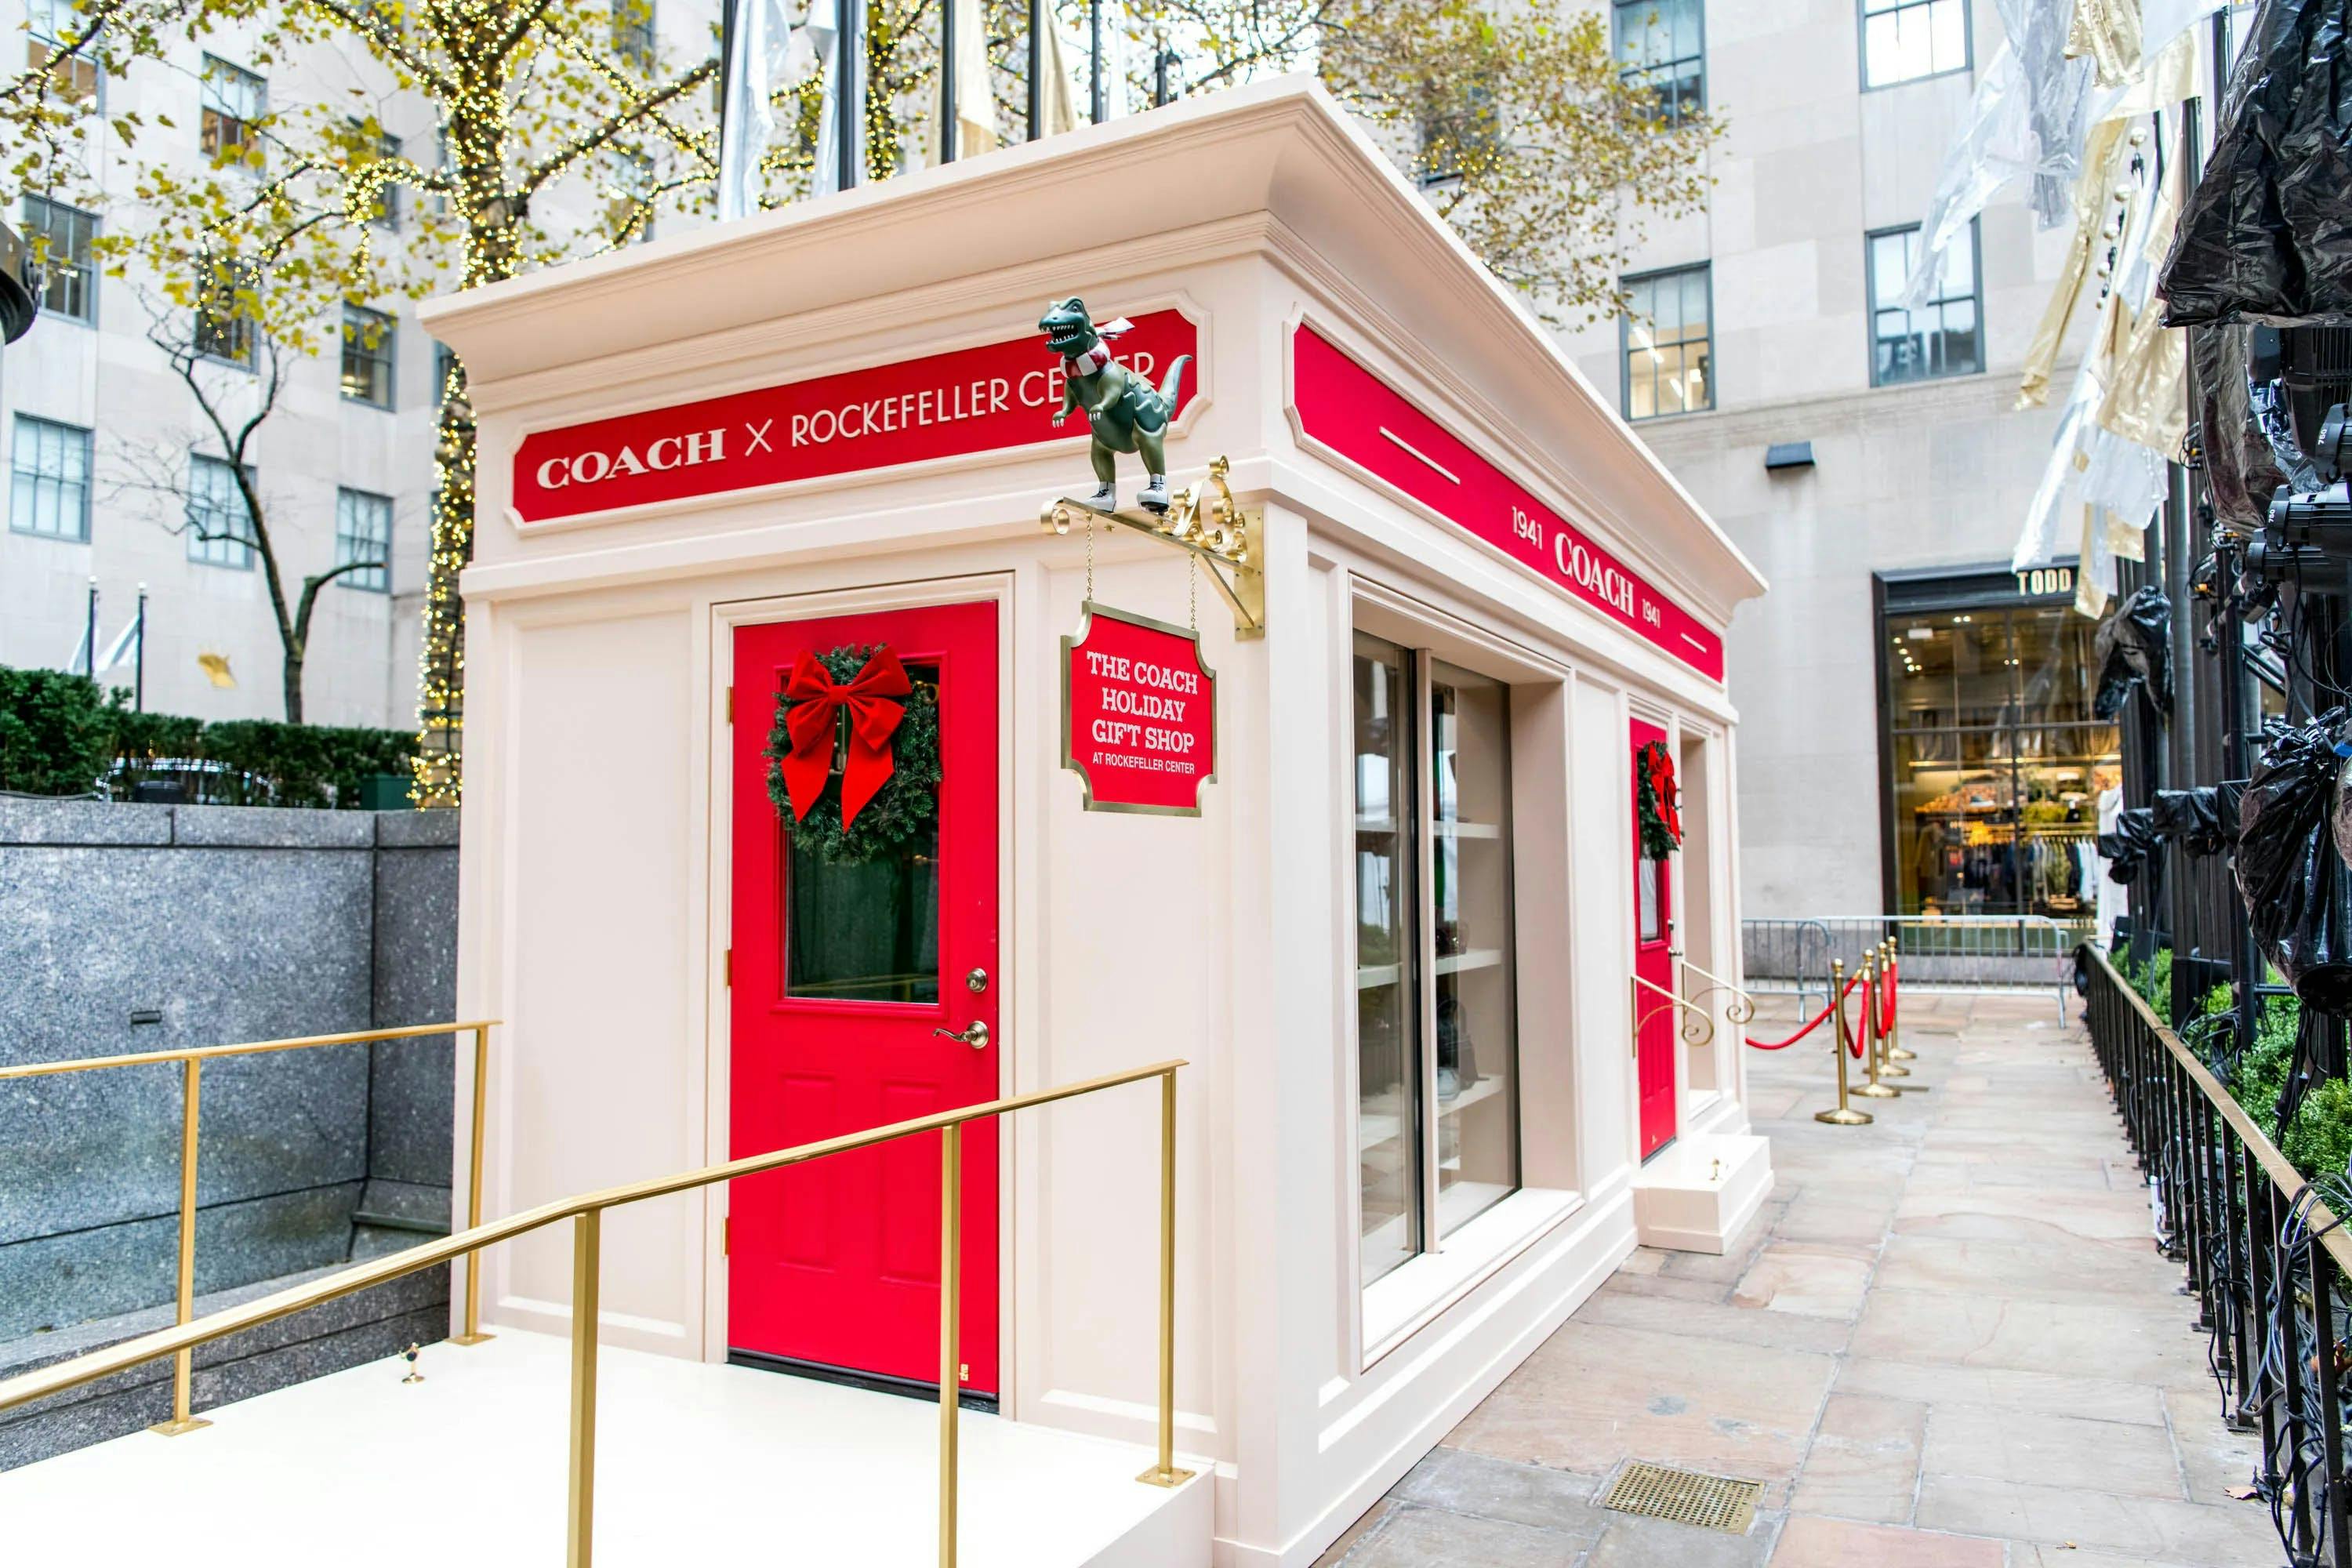 a small red and white building for coach x rockefeller holiday goft shop